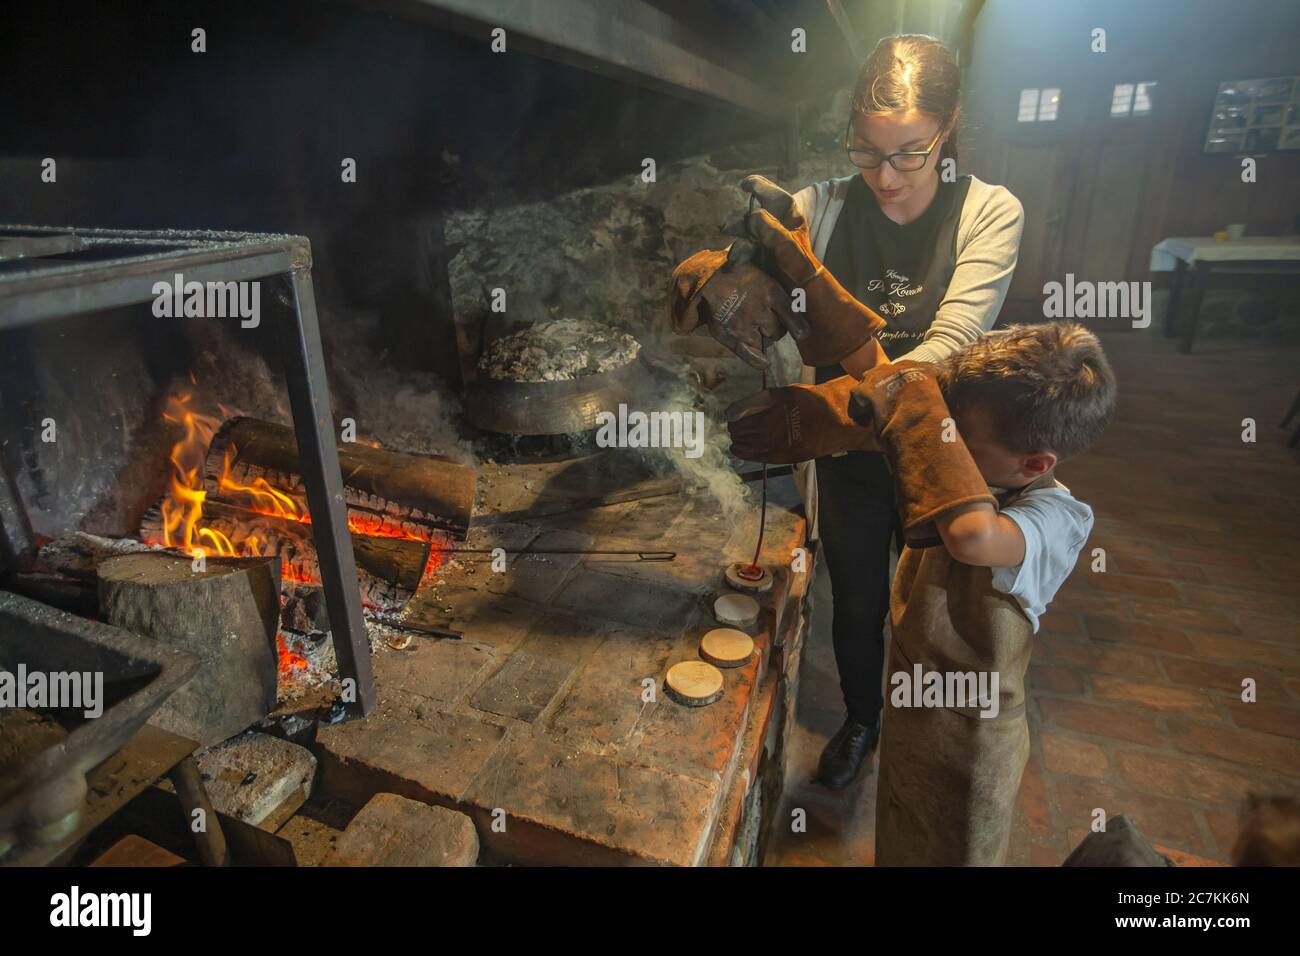 Beautiful shot of the young boy forging initials of his names with the help of a girl in Slovenia Stock Photo